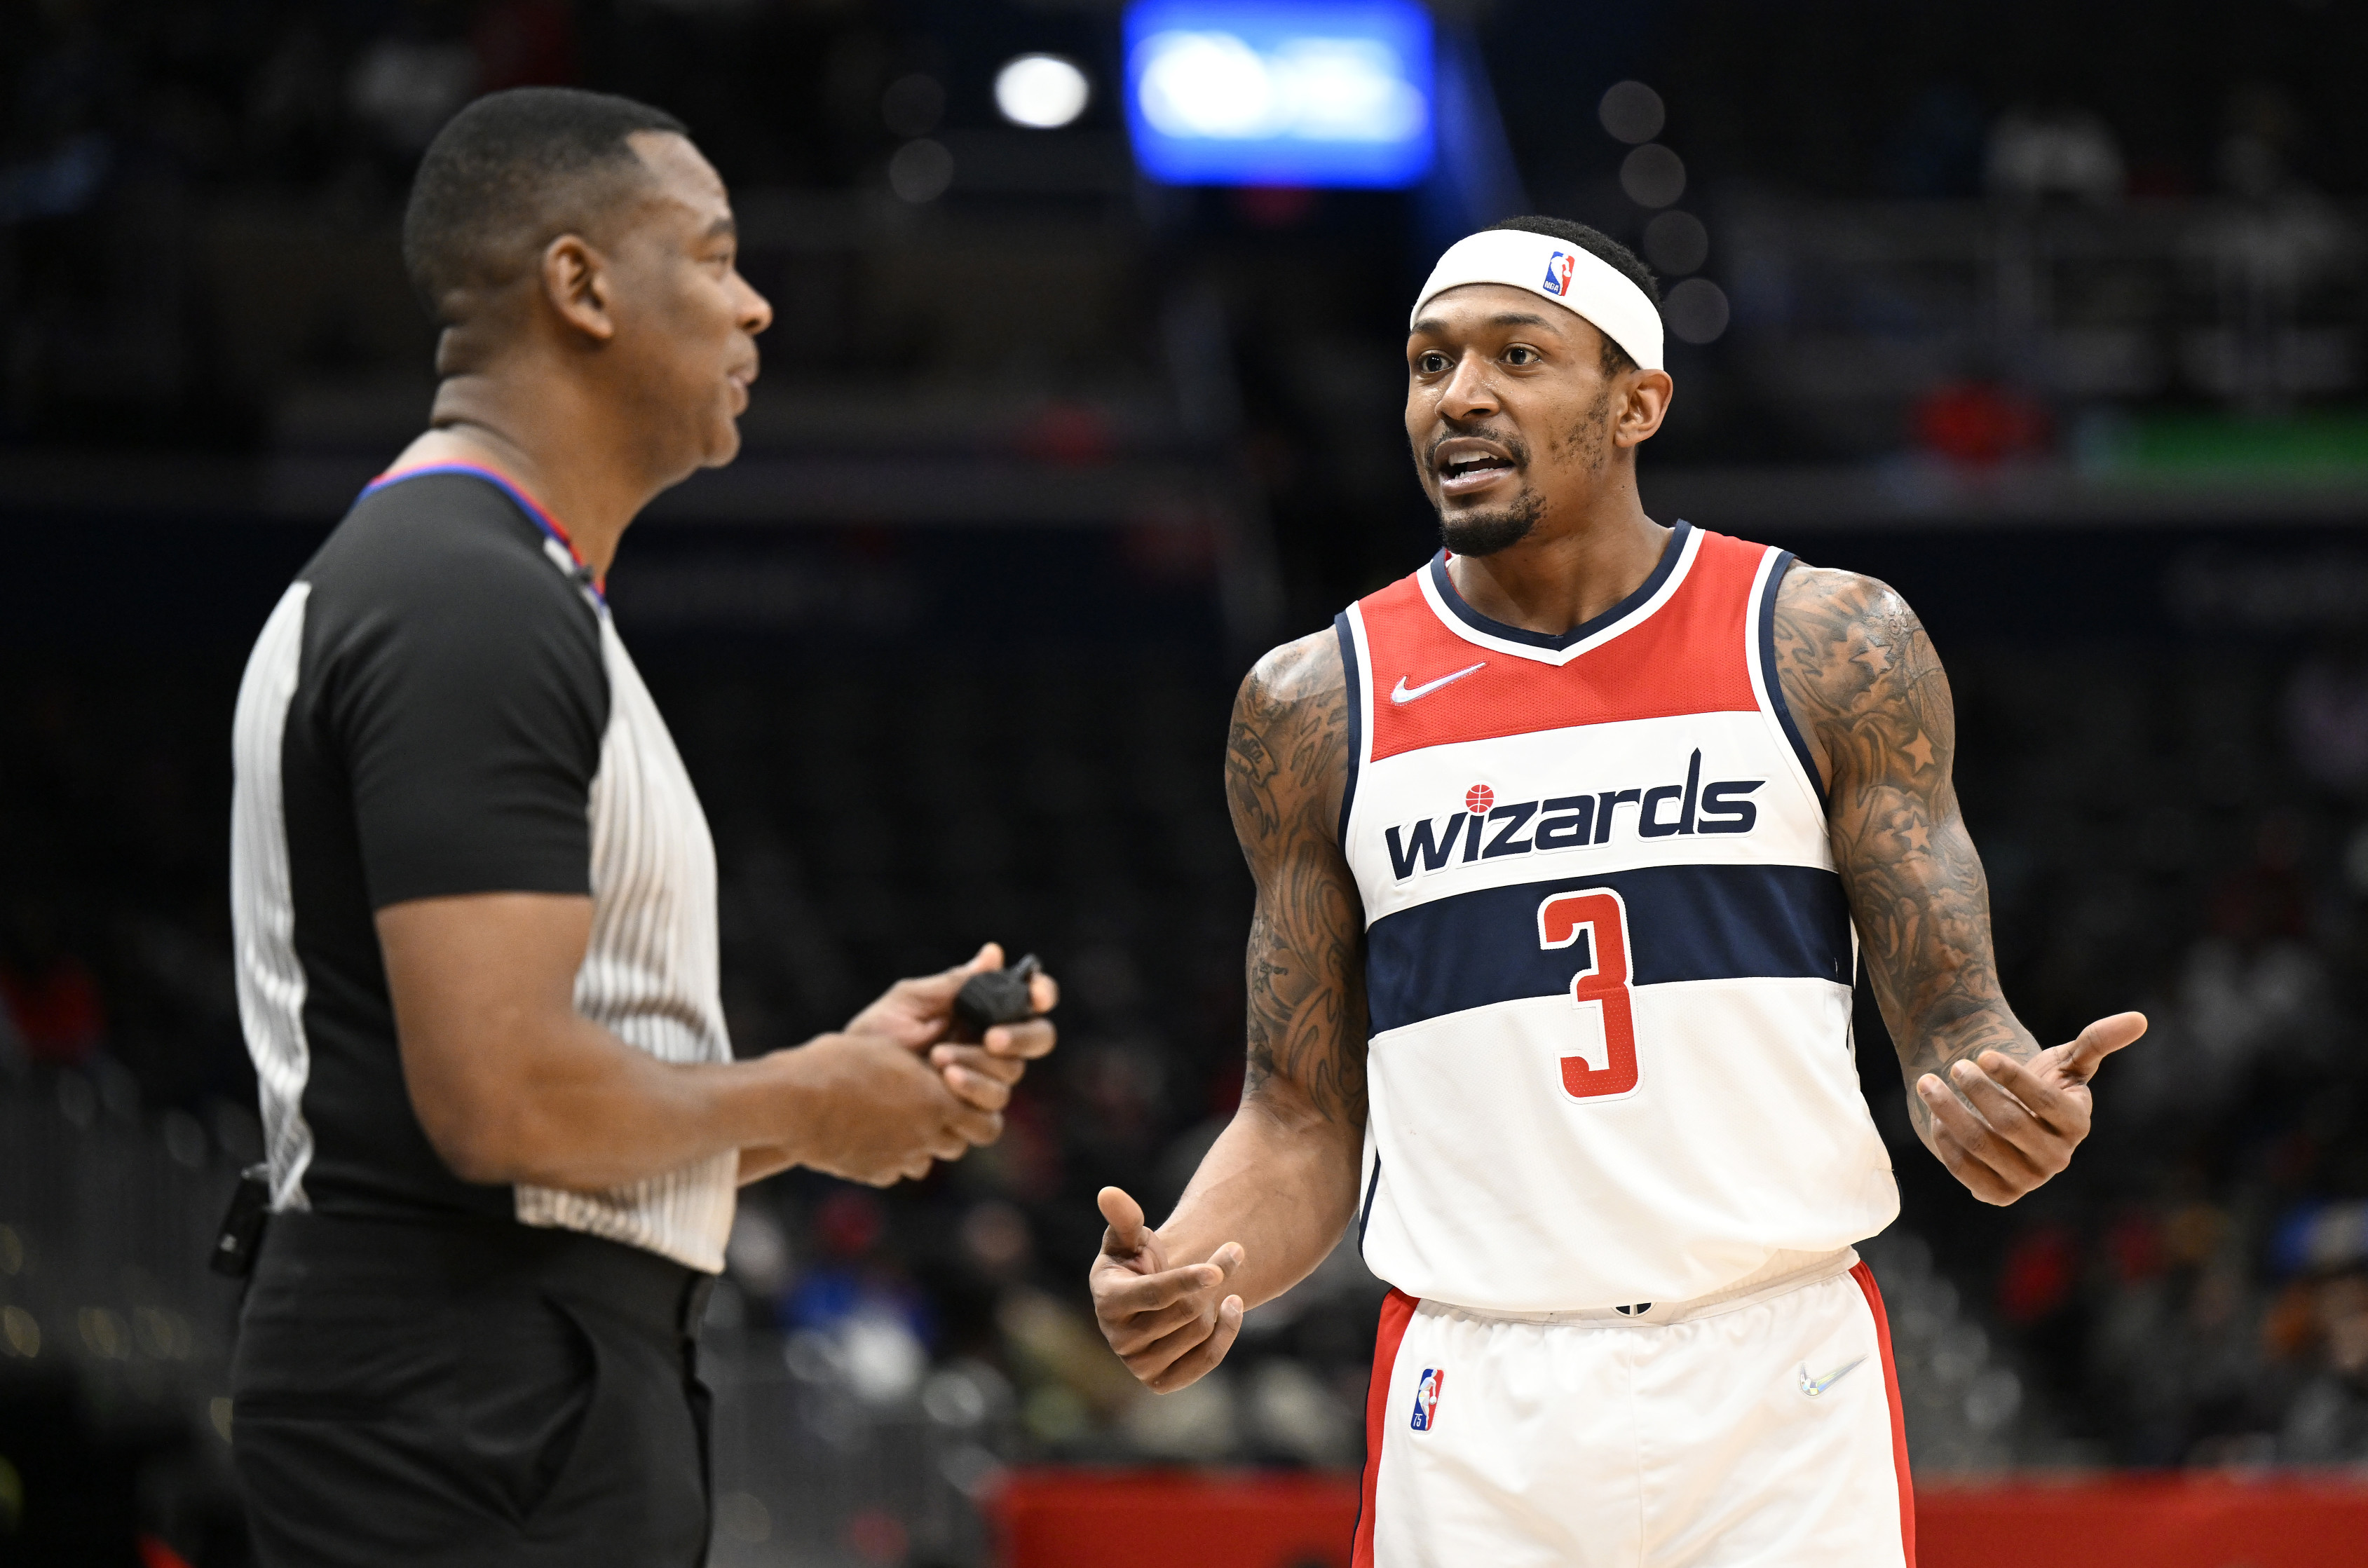 Wizards' Gary Payton II deserves a multi-year NBA contract